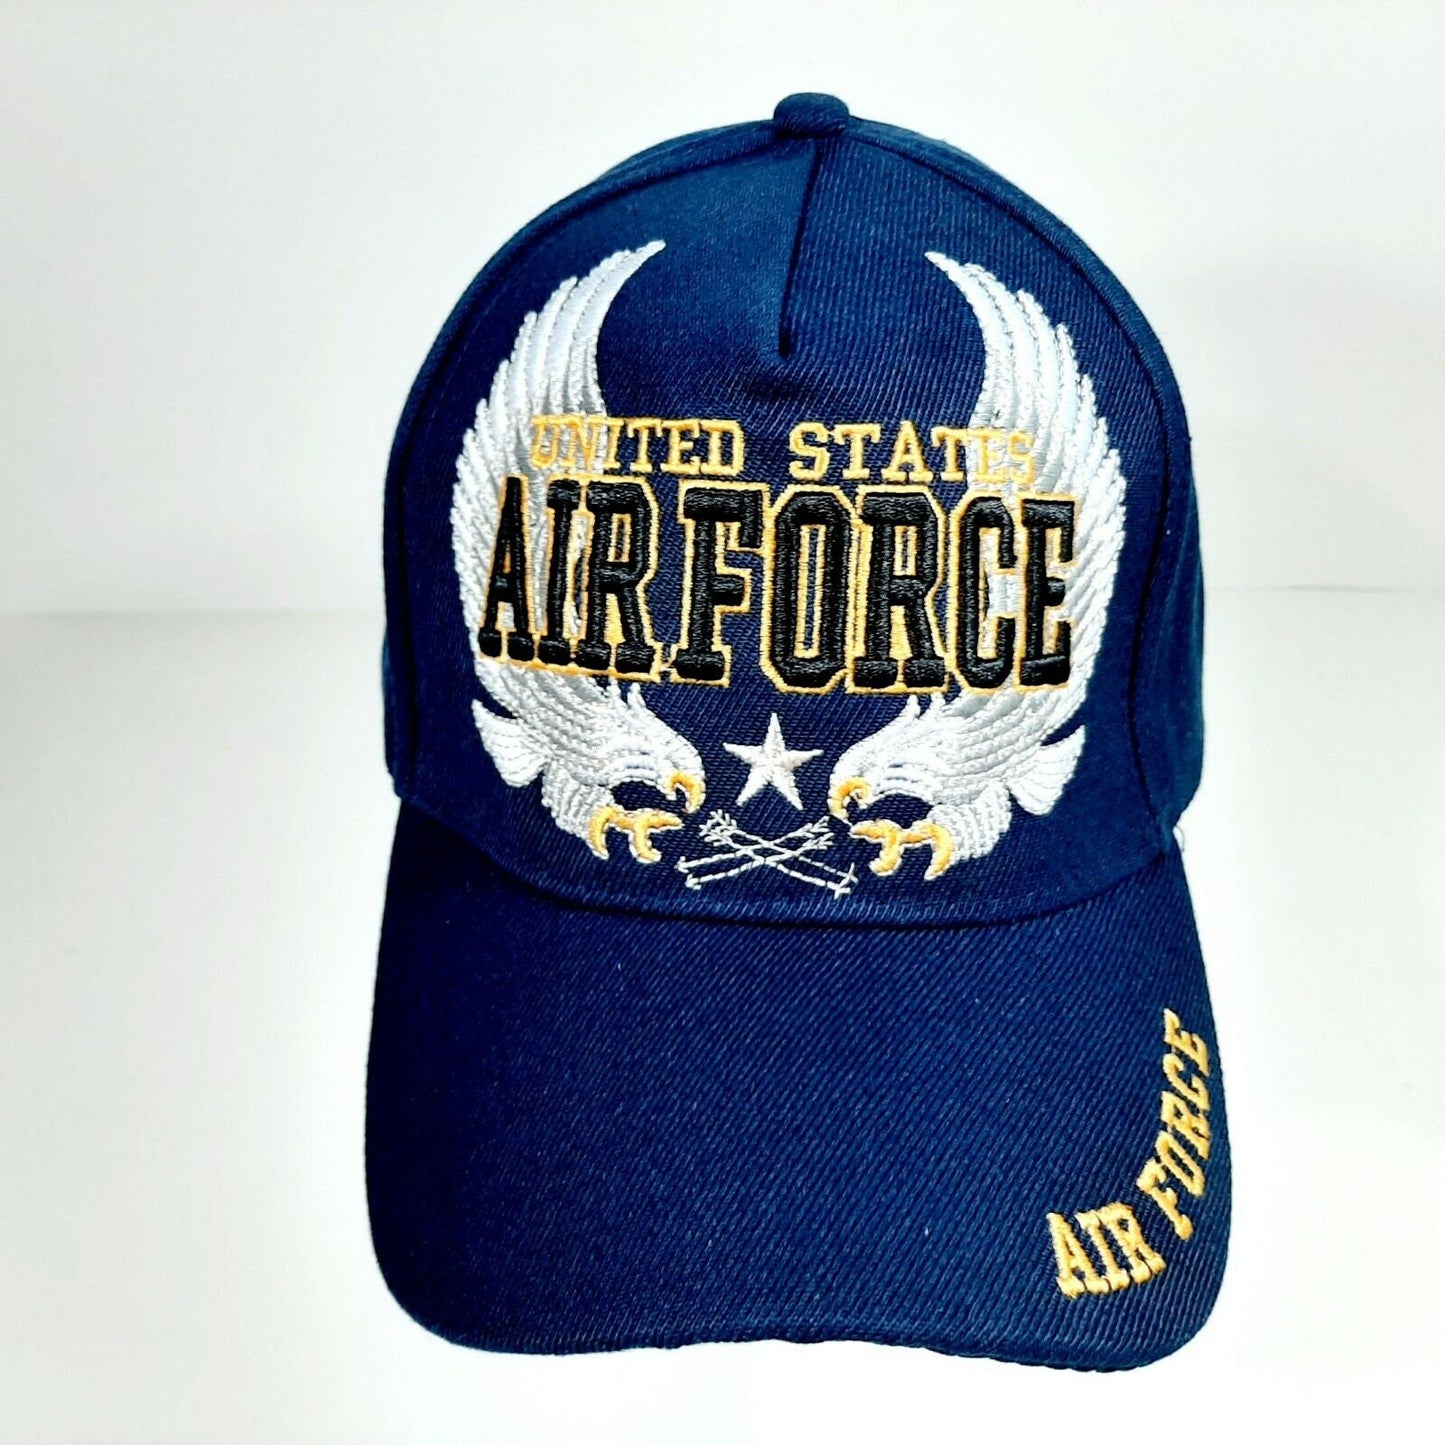 United States Air Force Men's Embroidered Ball Cap Navy Blue Acrylic